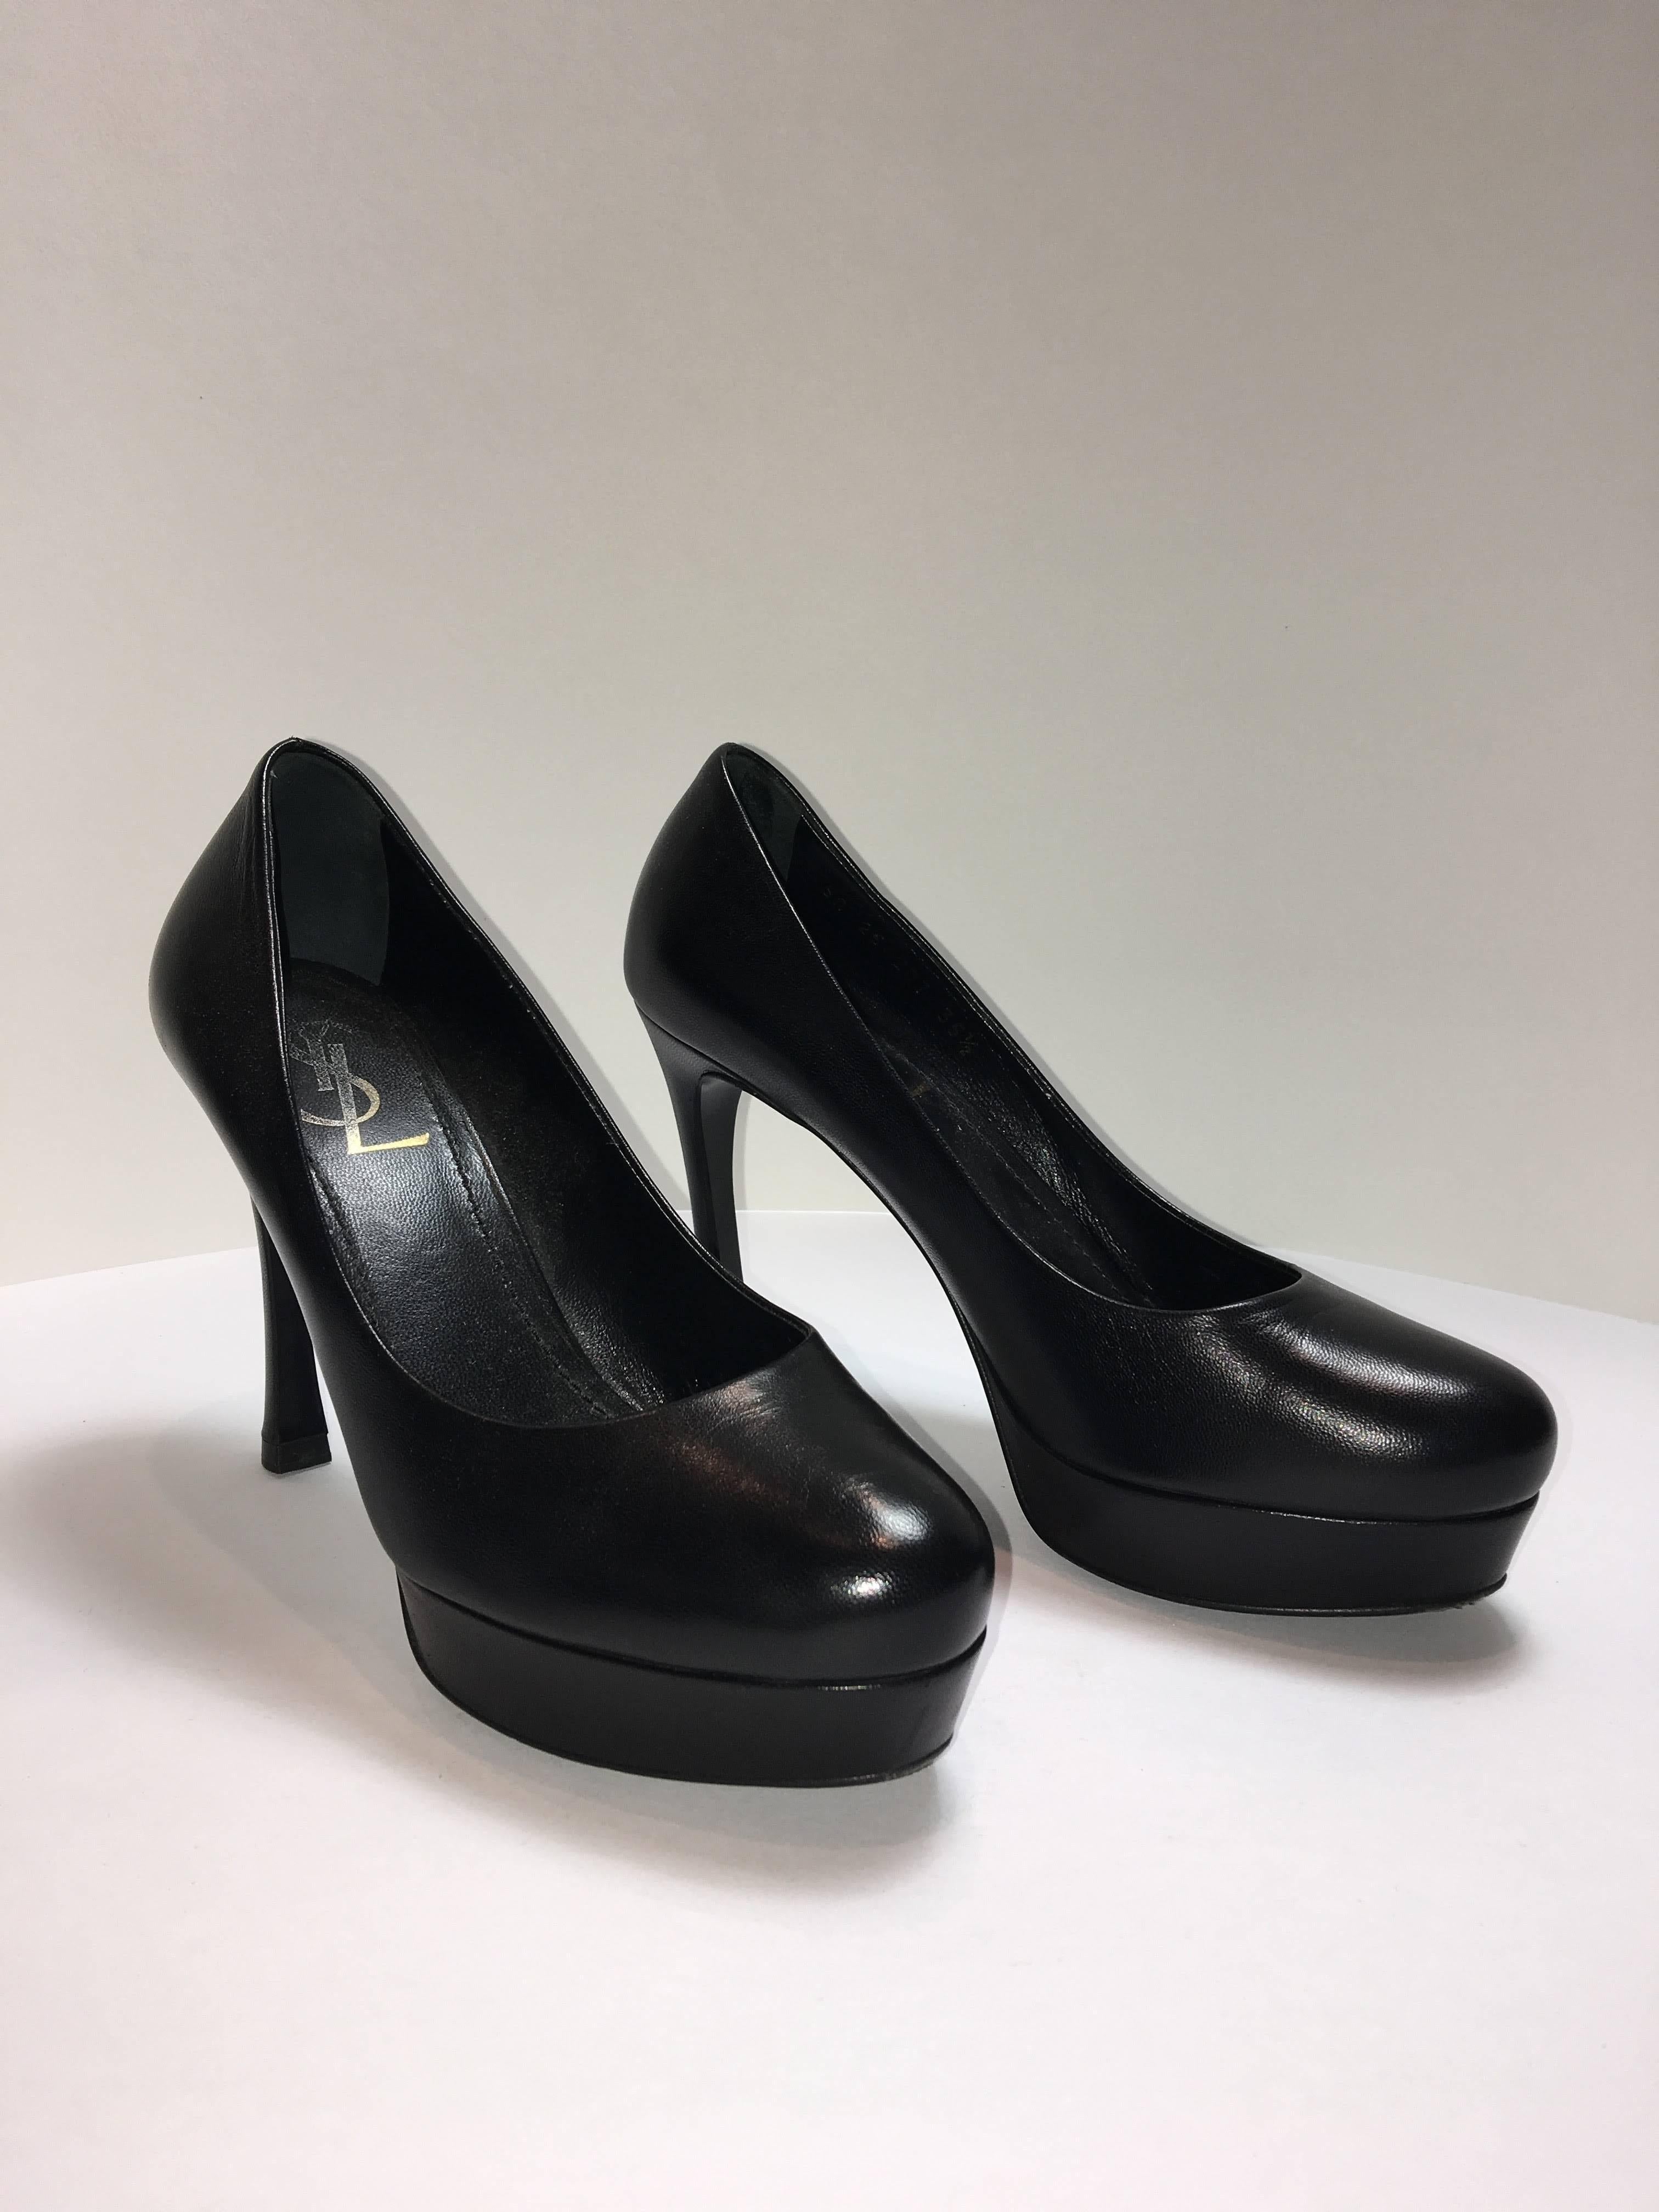 YSL pumps with platform sole. Made of black leather with a rounded toe. These heels show very light wear. 